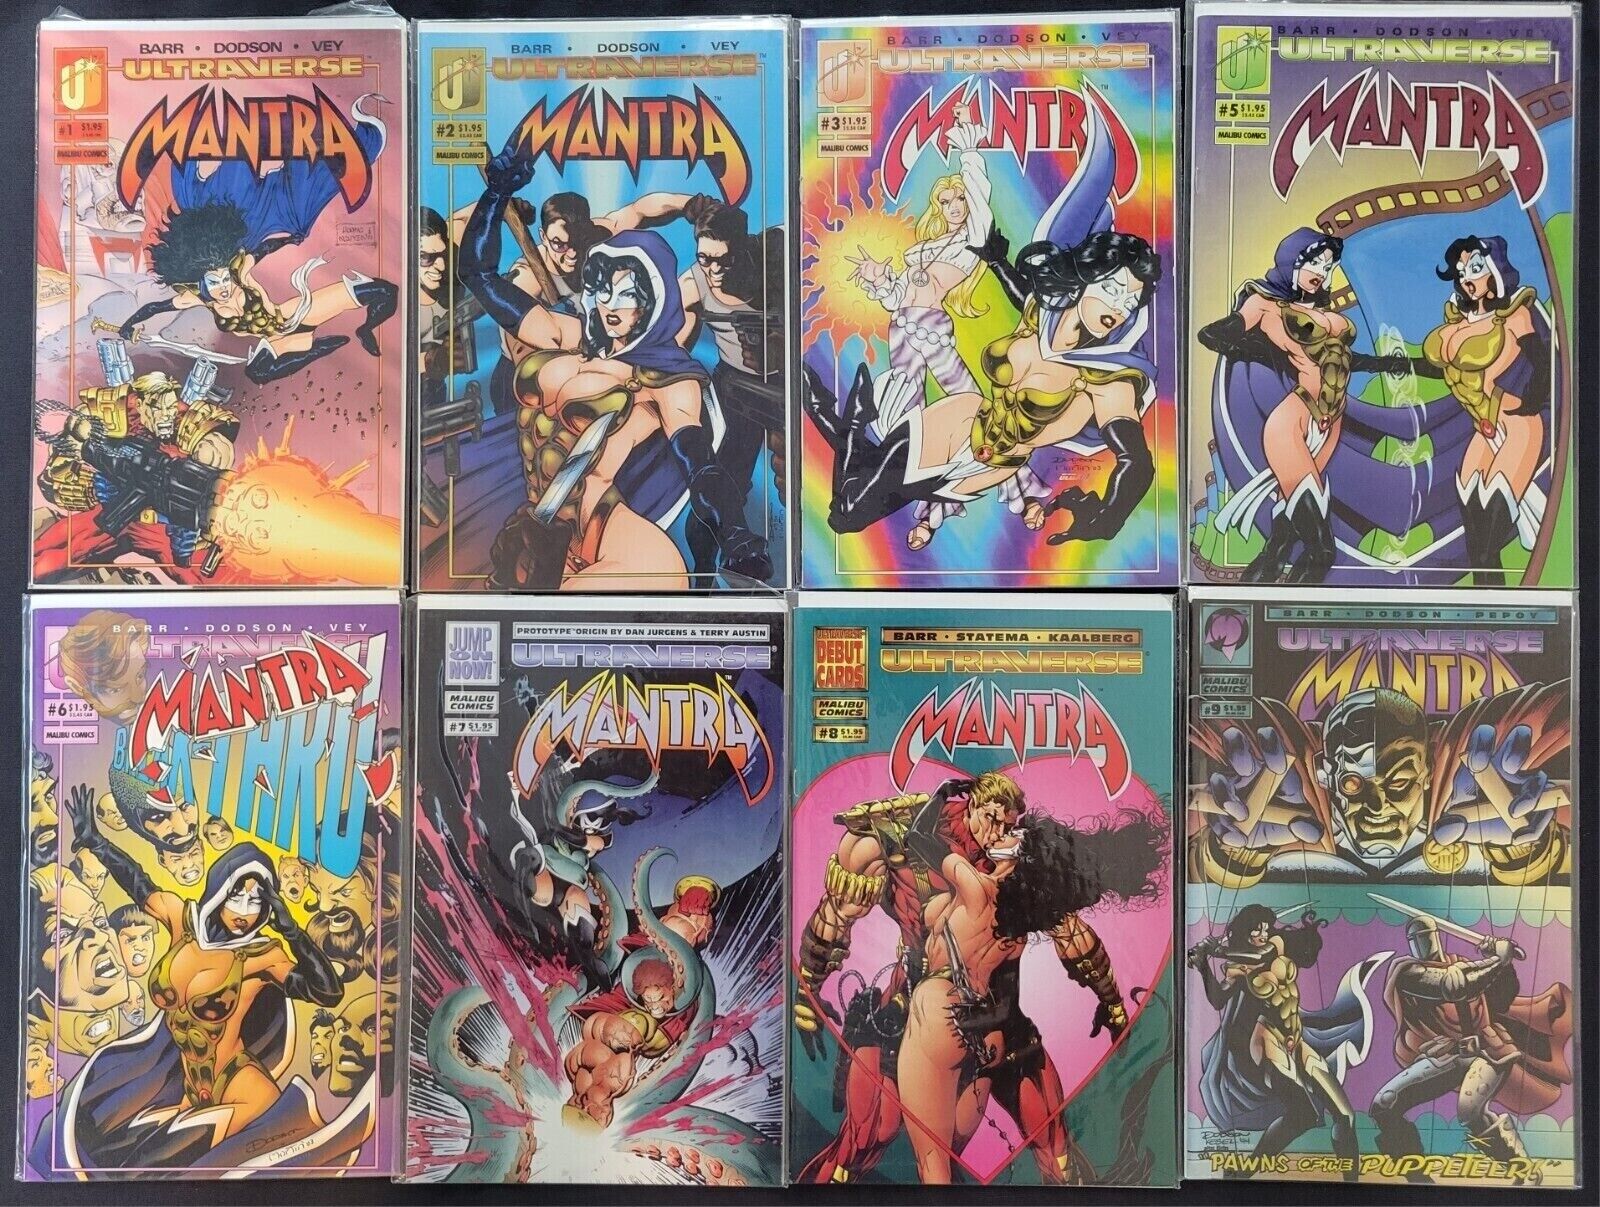 Mantra Vol. 1 (1993-1995) From #1-21, Lot of 20 